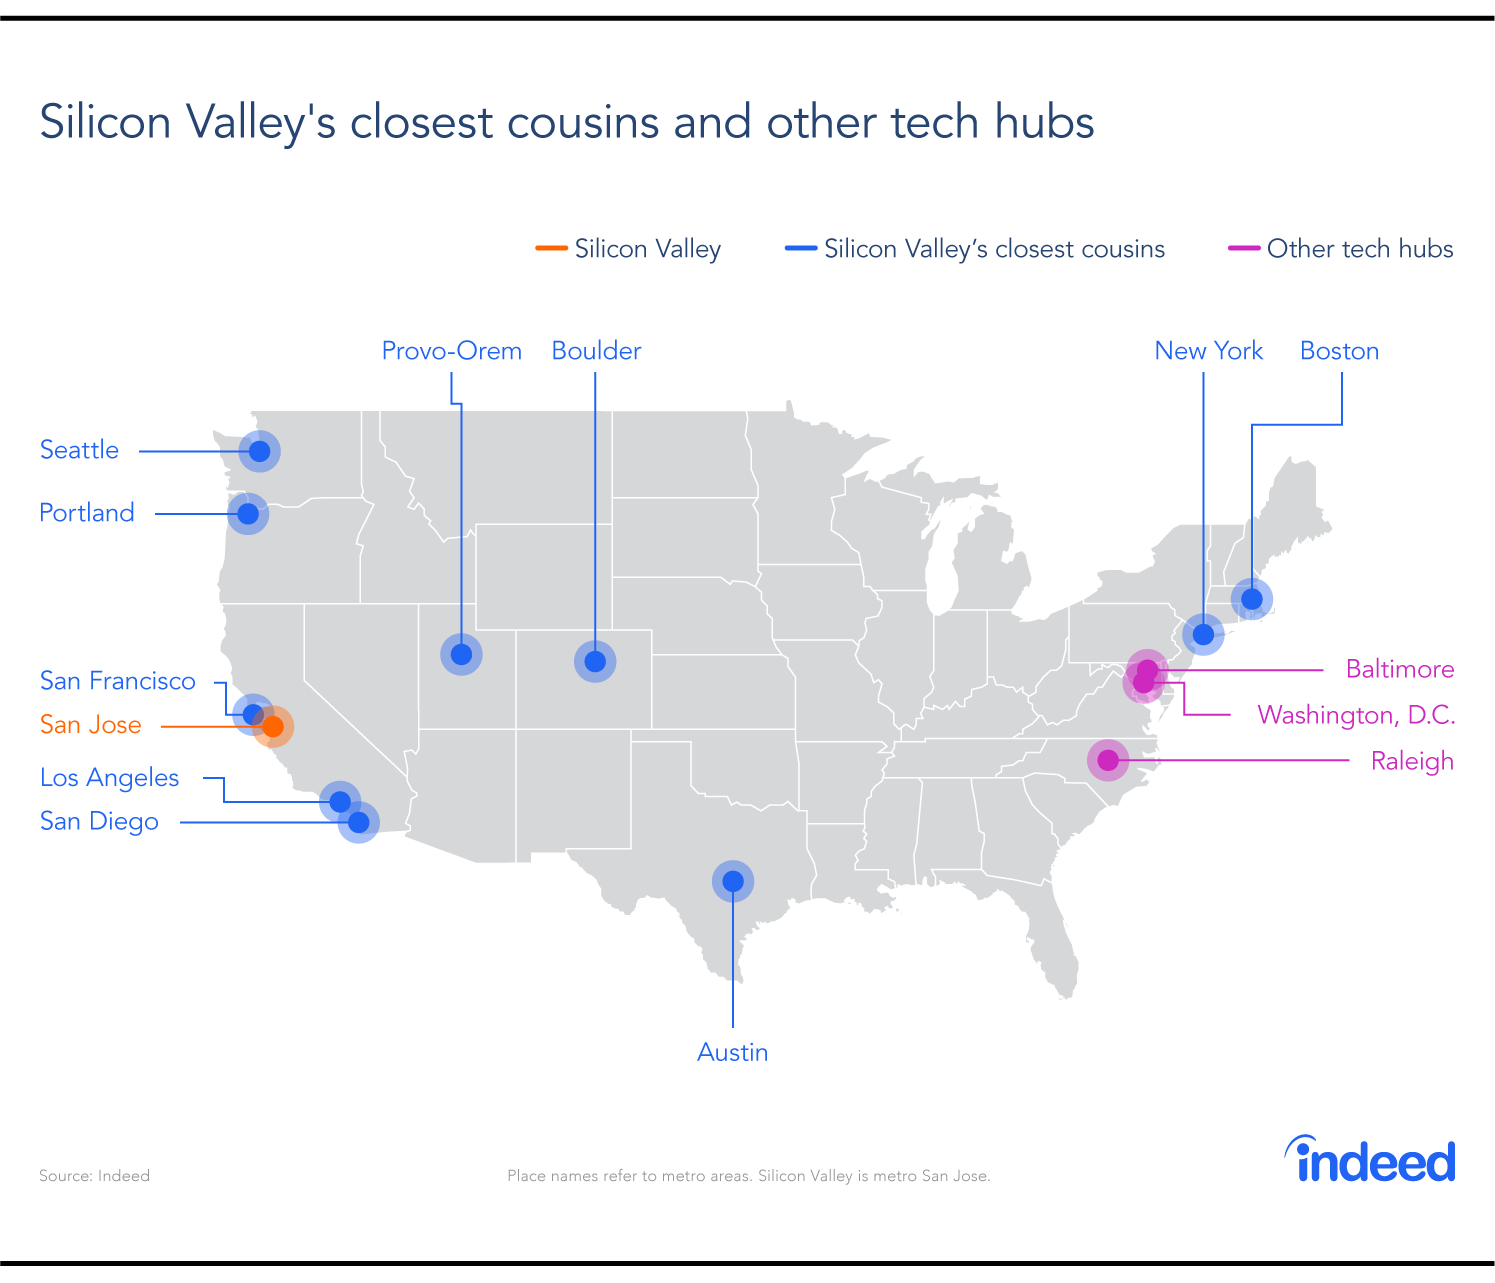 Silicon Valley's closest cousins and other tech hubs